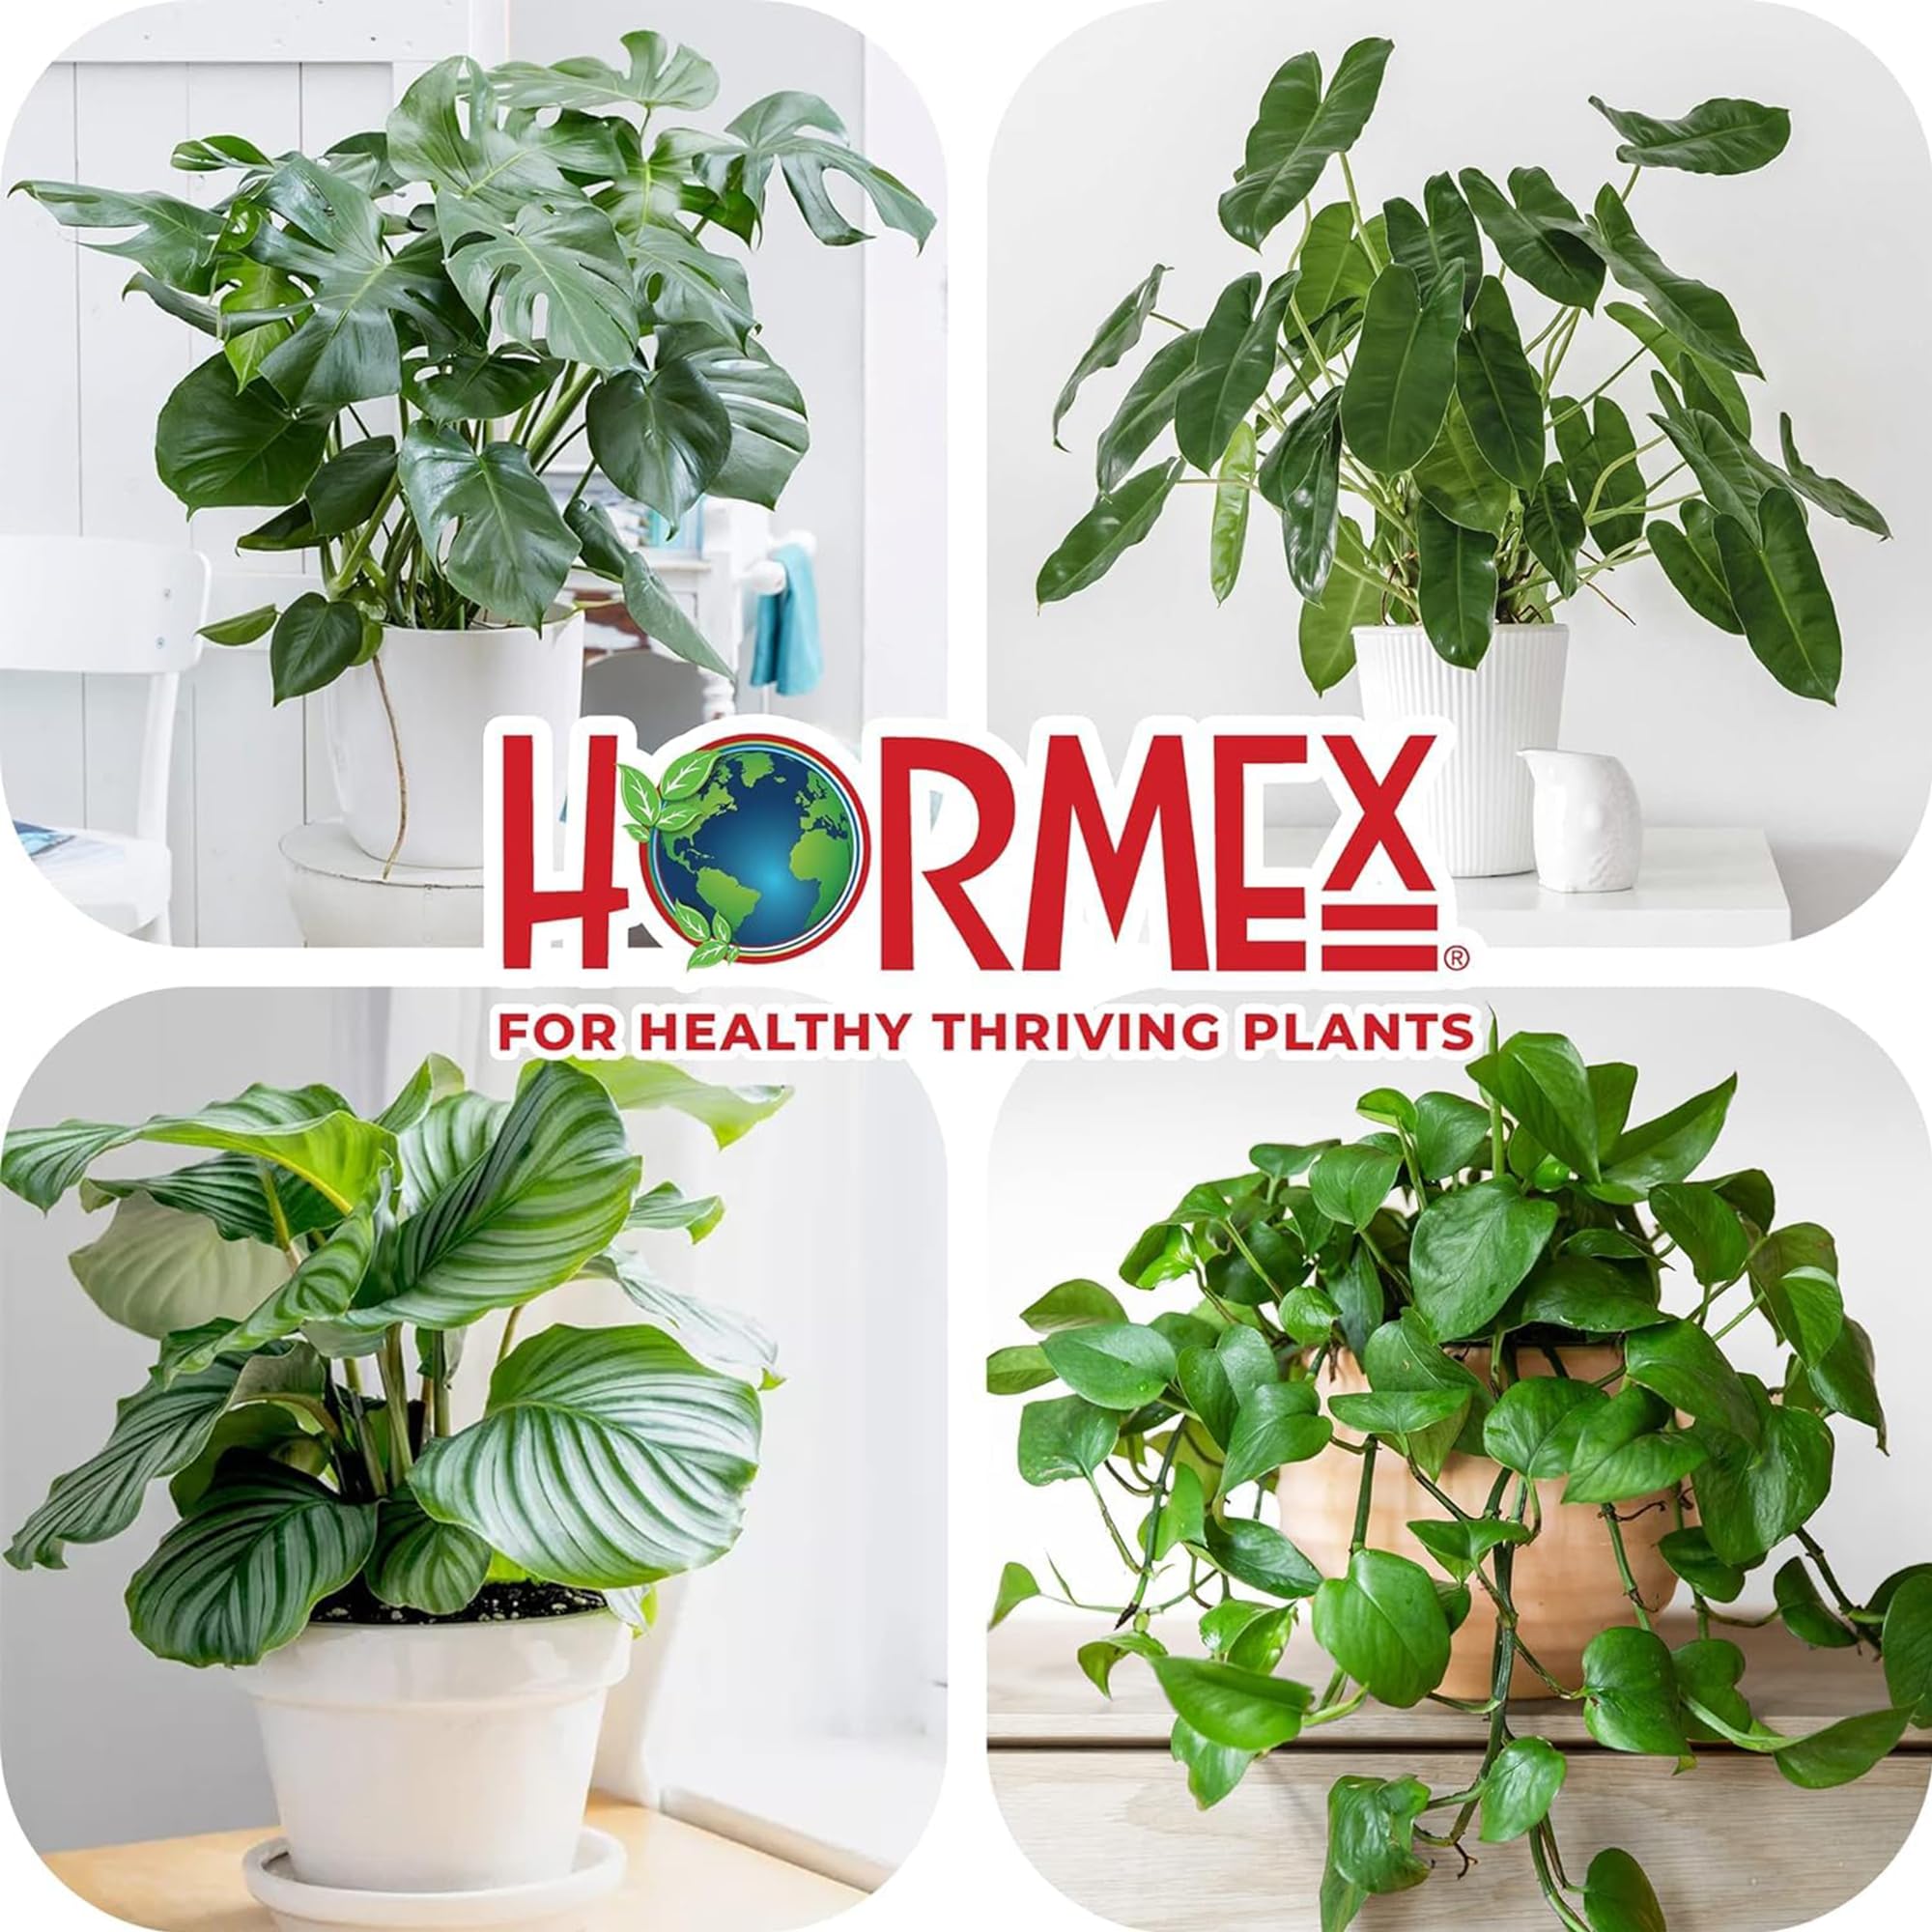 Hormex Rooting Powder #1 - for Moderately Difficult to Root Plants - 0.1 IBA Rooting Hormone for Plant Cuttings - Fast & Effective - Free of Alcohol, Dye, Gel & Preservatives for Healthier Roots, 21g